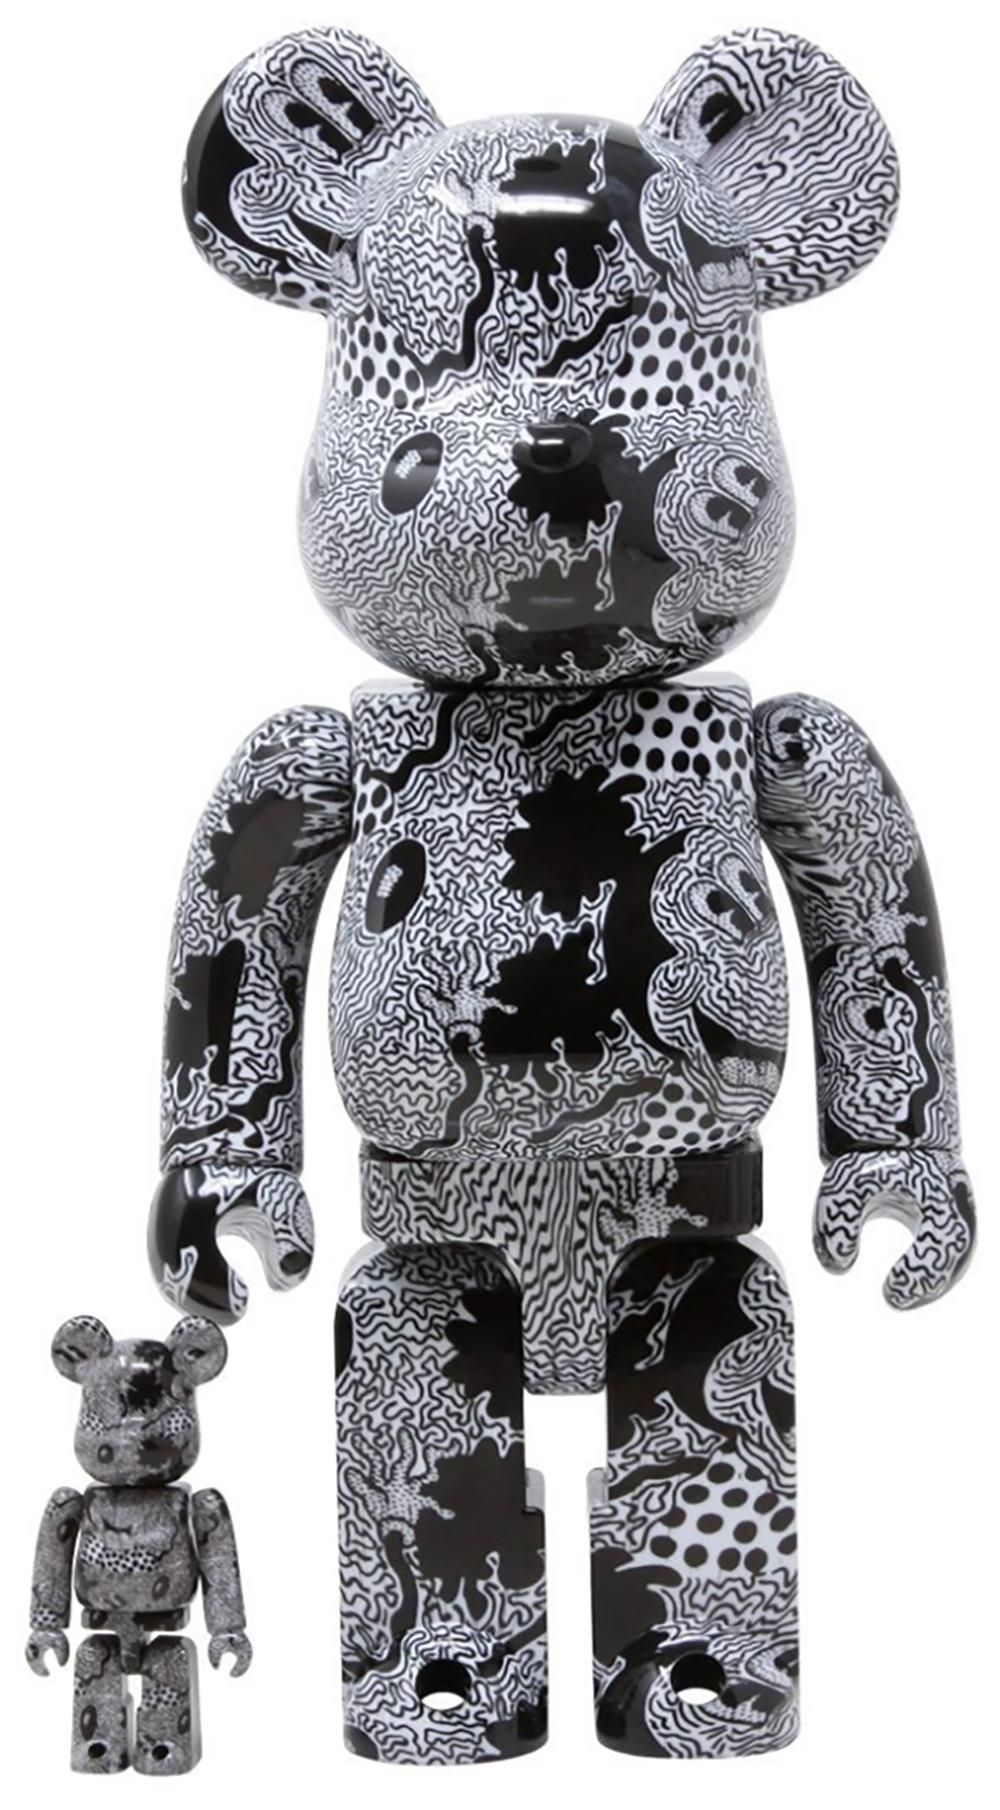 Keith Haring Bearbrick 400% Begleiter (Haring Mickey Mouse BE@RBRICK) – Print von (after) Keith Haring